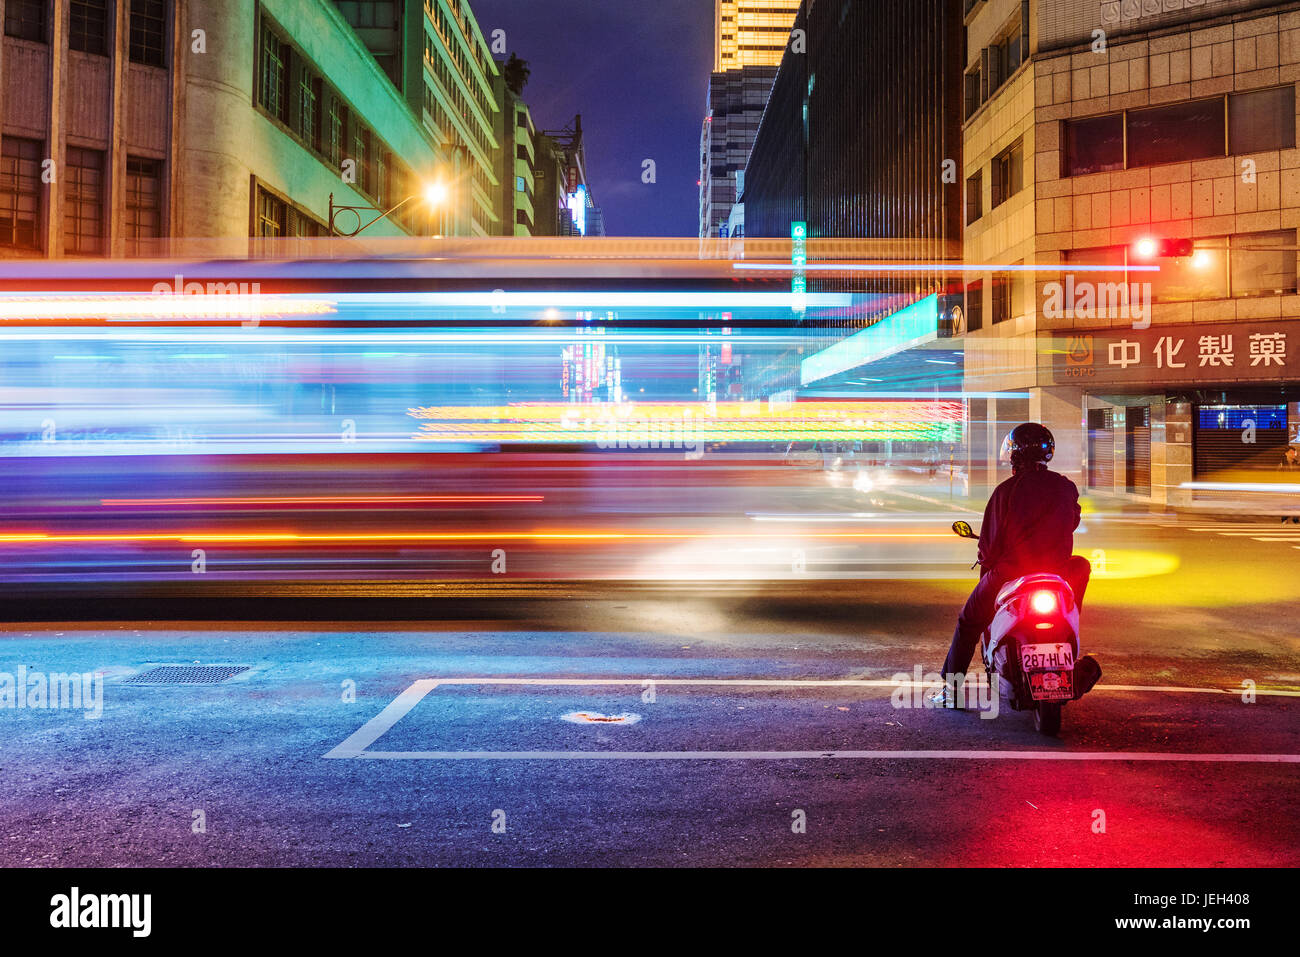 TAIPEI, TAIWAN - MAY 27: This is a night view of motorcyclist waiting at traffic lights for the light to change to green in the downtown area on May 2 Stock Photo